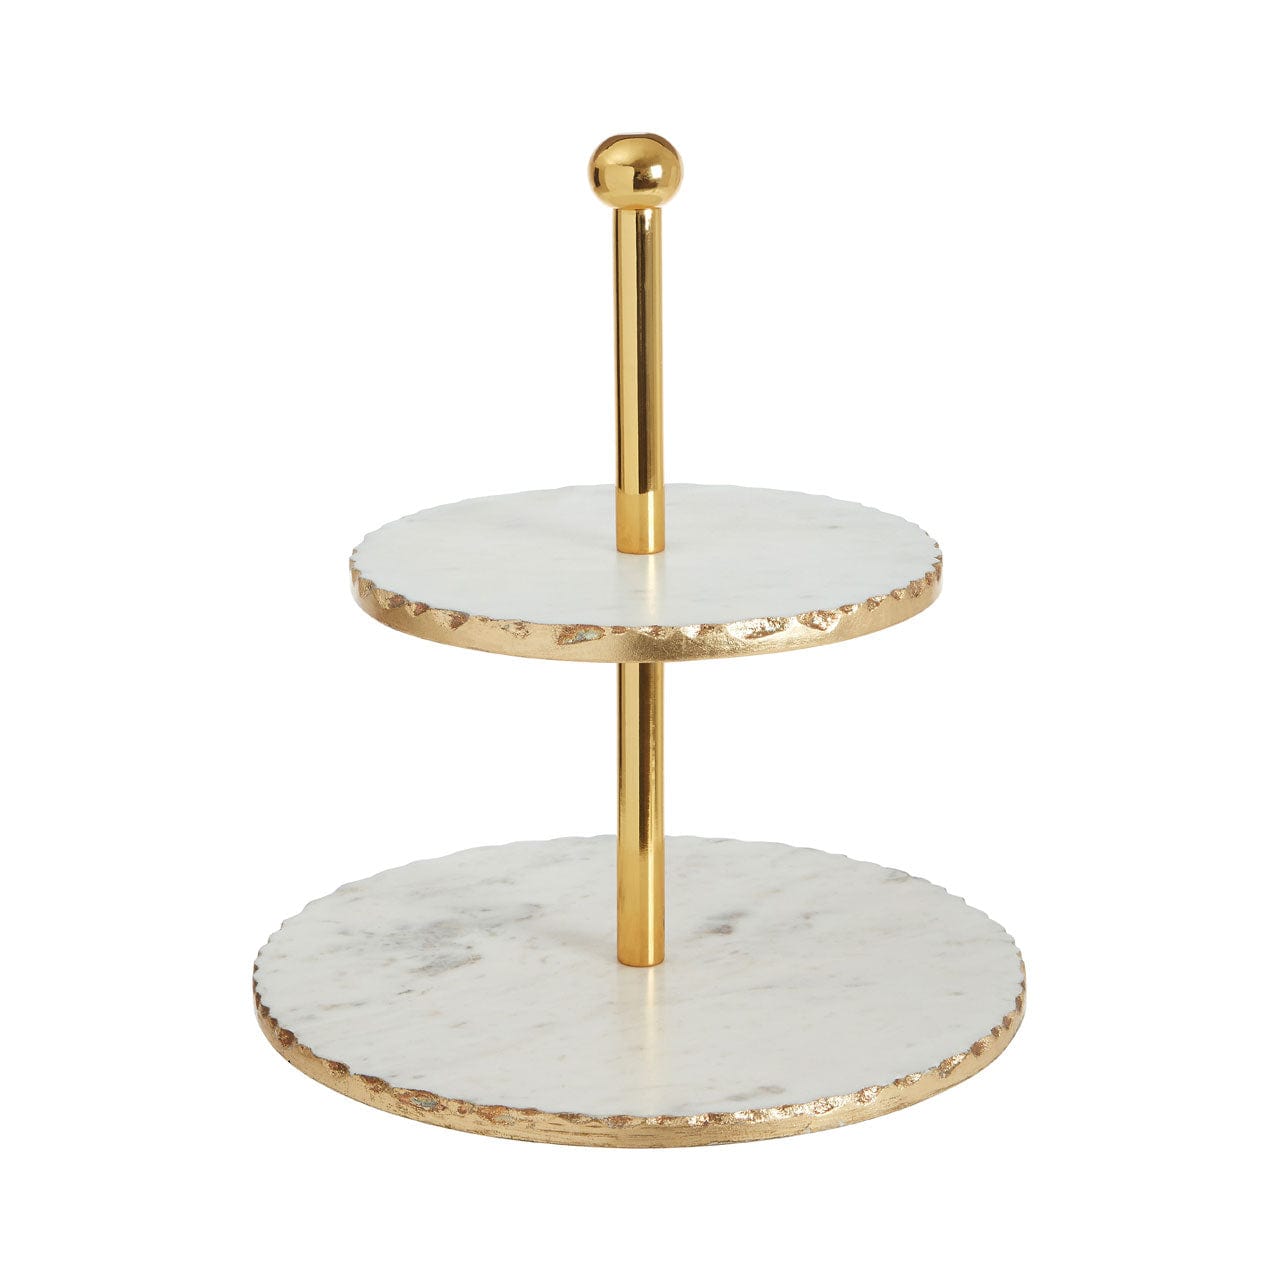 Hamilton Interiors Accessories 2 Tier White Marble And Gold Finish Cake Stand House of Isabella UK